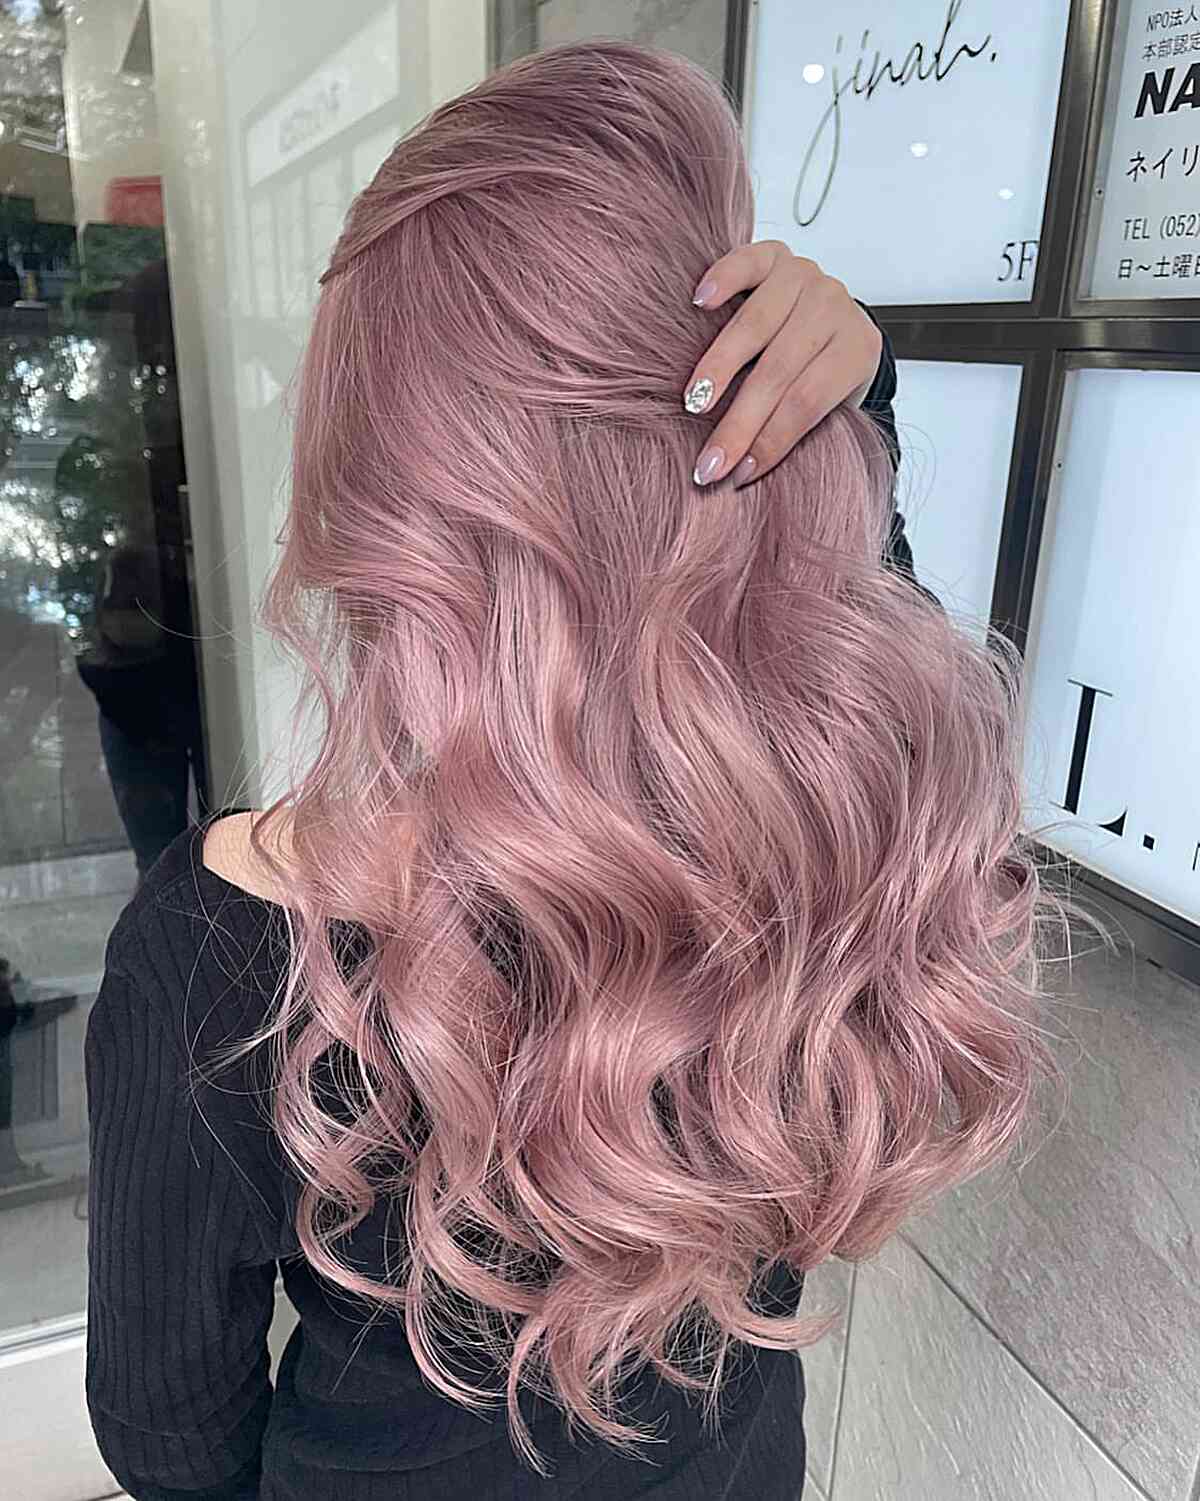 Dusted Tones of Pink Hair